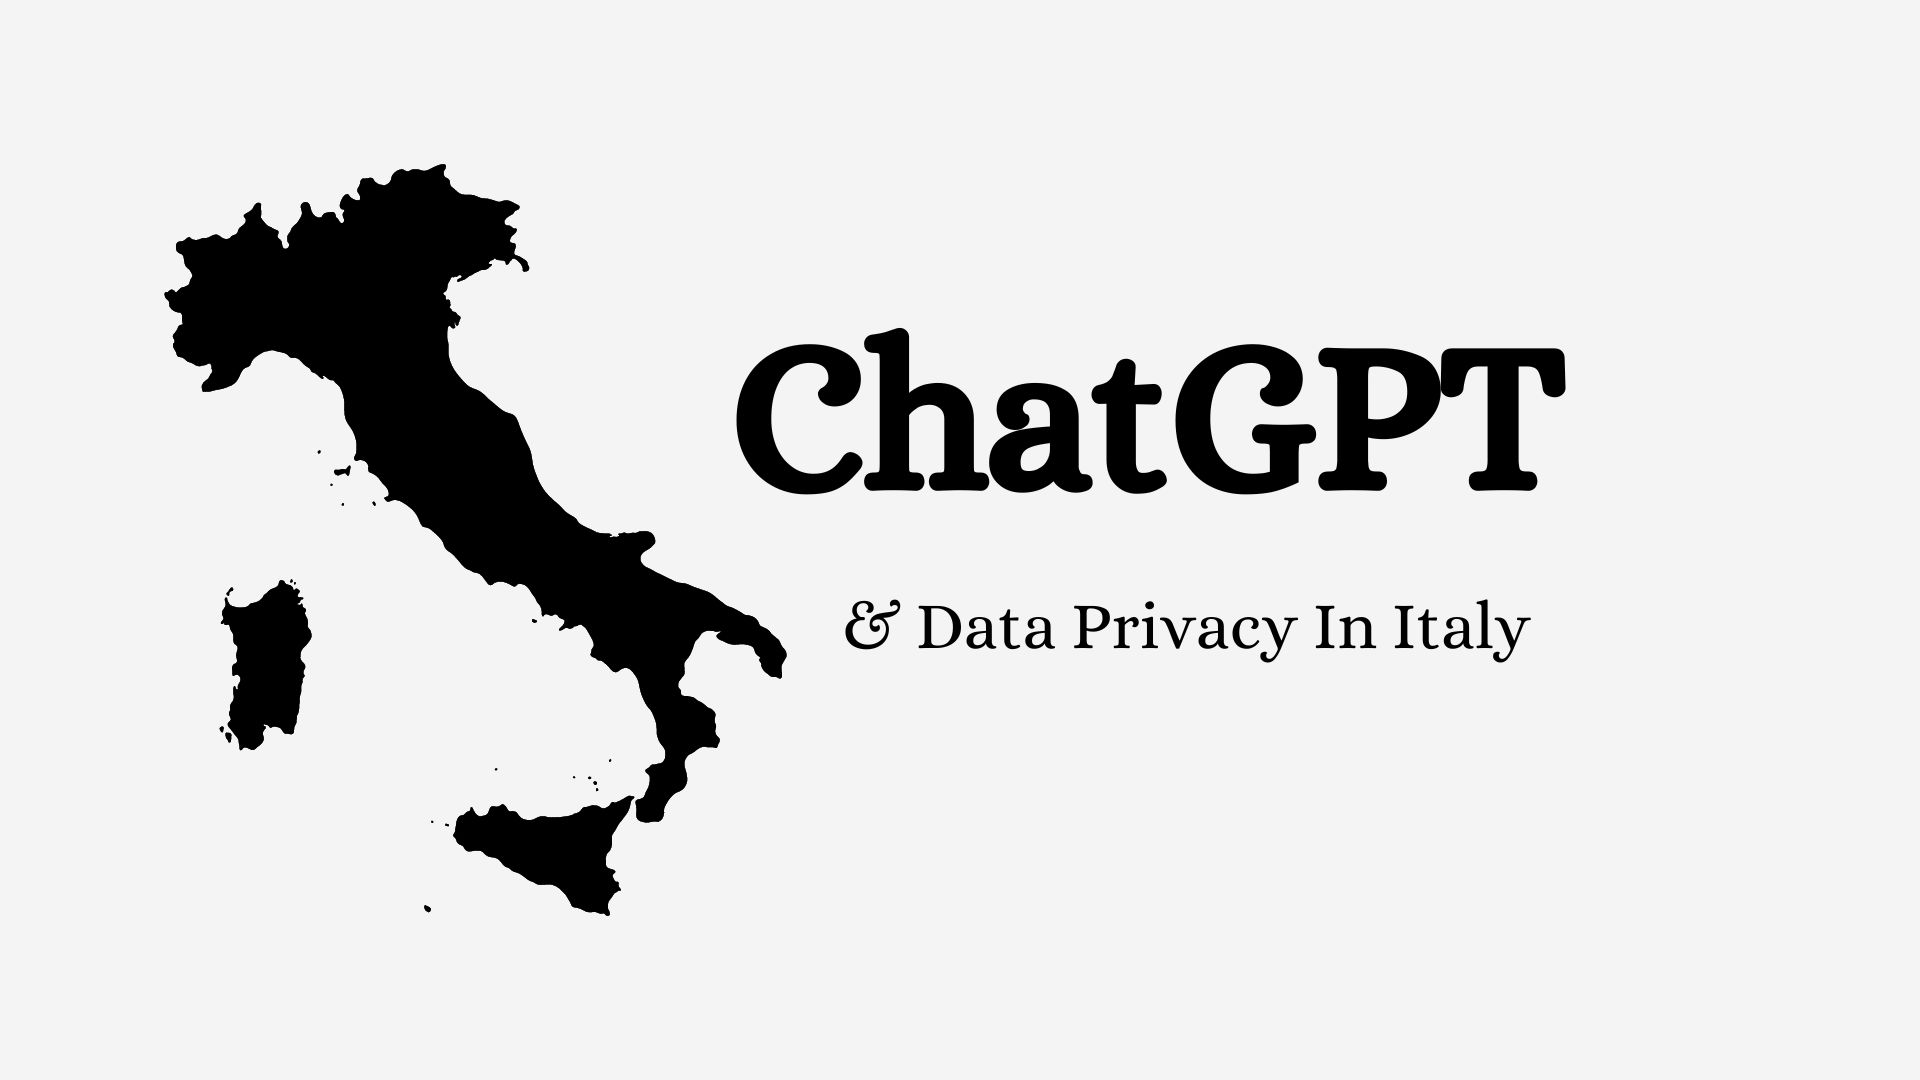 Most recently we saw Italy ban ChatGPT, which was the first Western country to ban the AI chatbot.